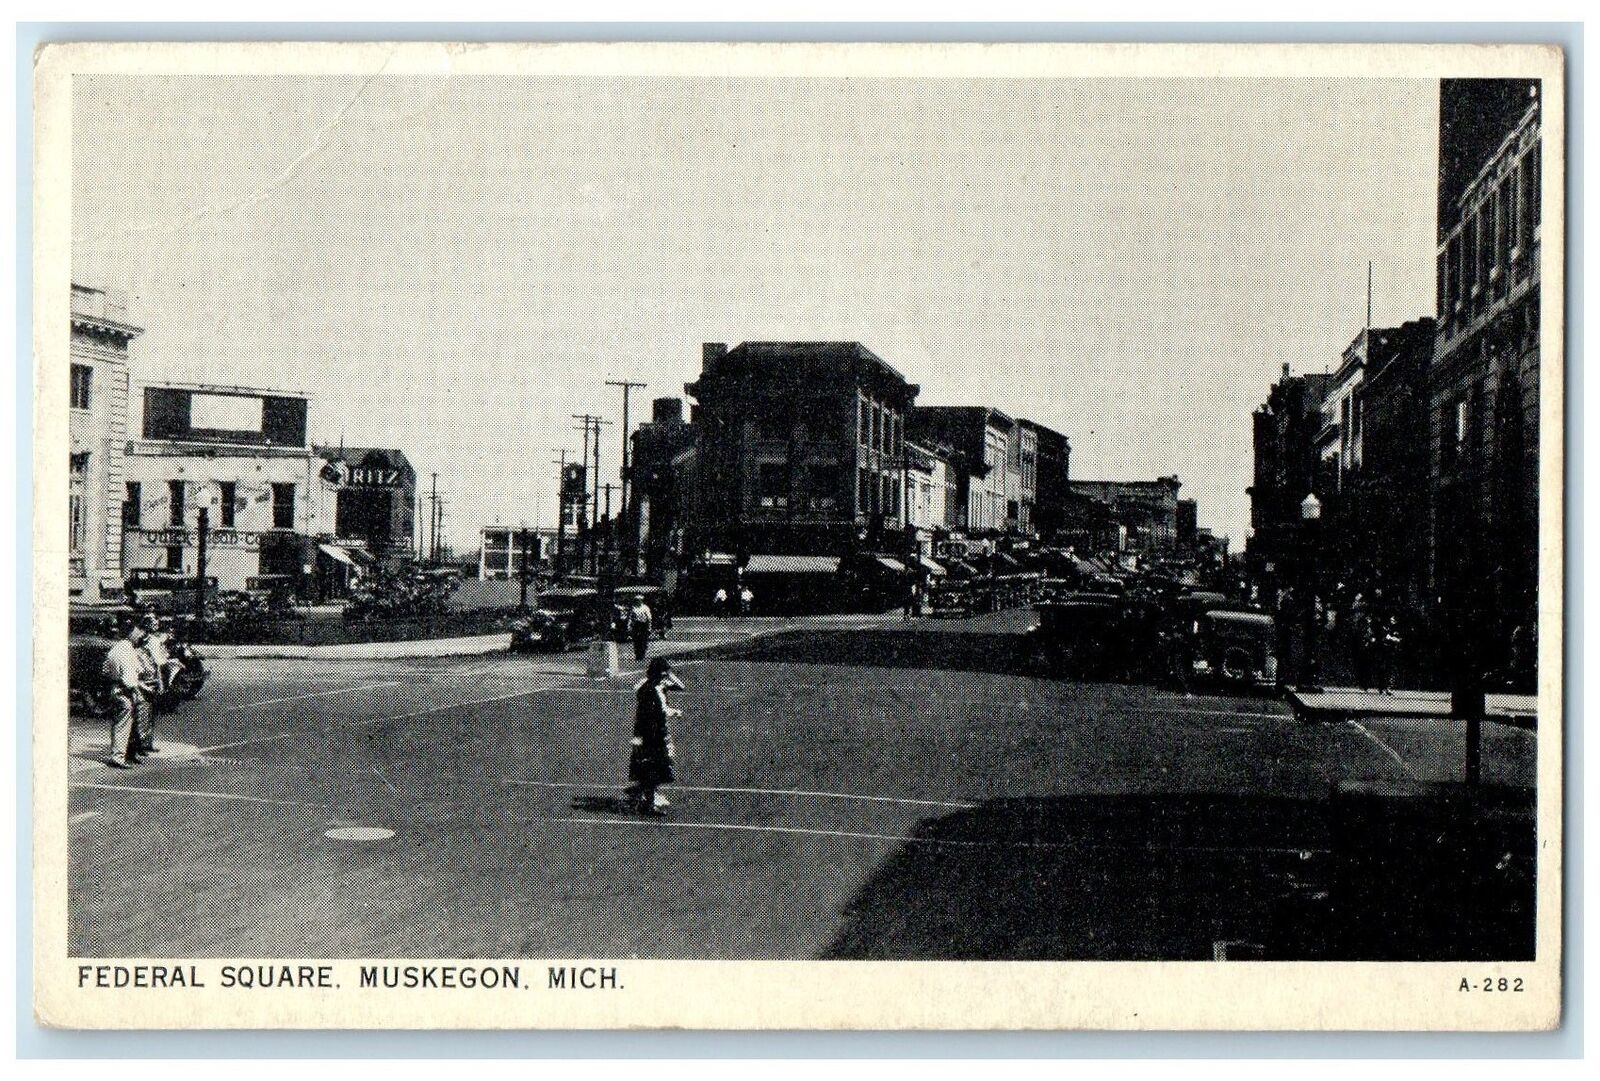 1943 Federal Square Classic Cars Parked Buildings Muskegon Michigan MI Postcard